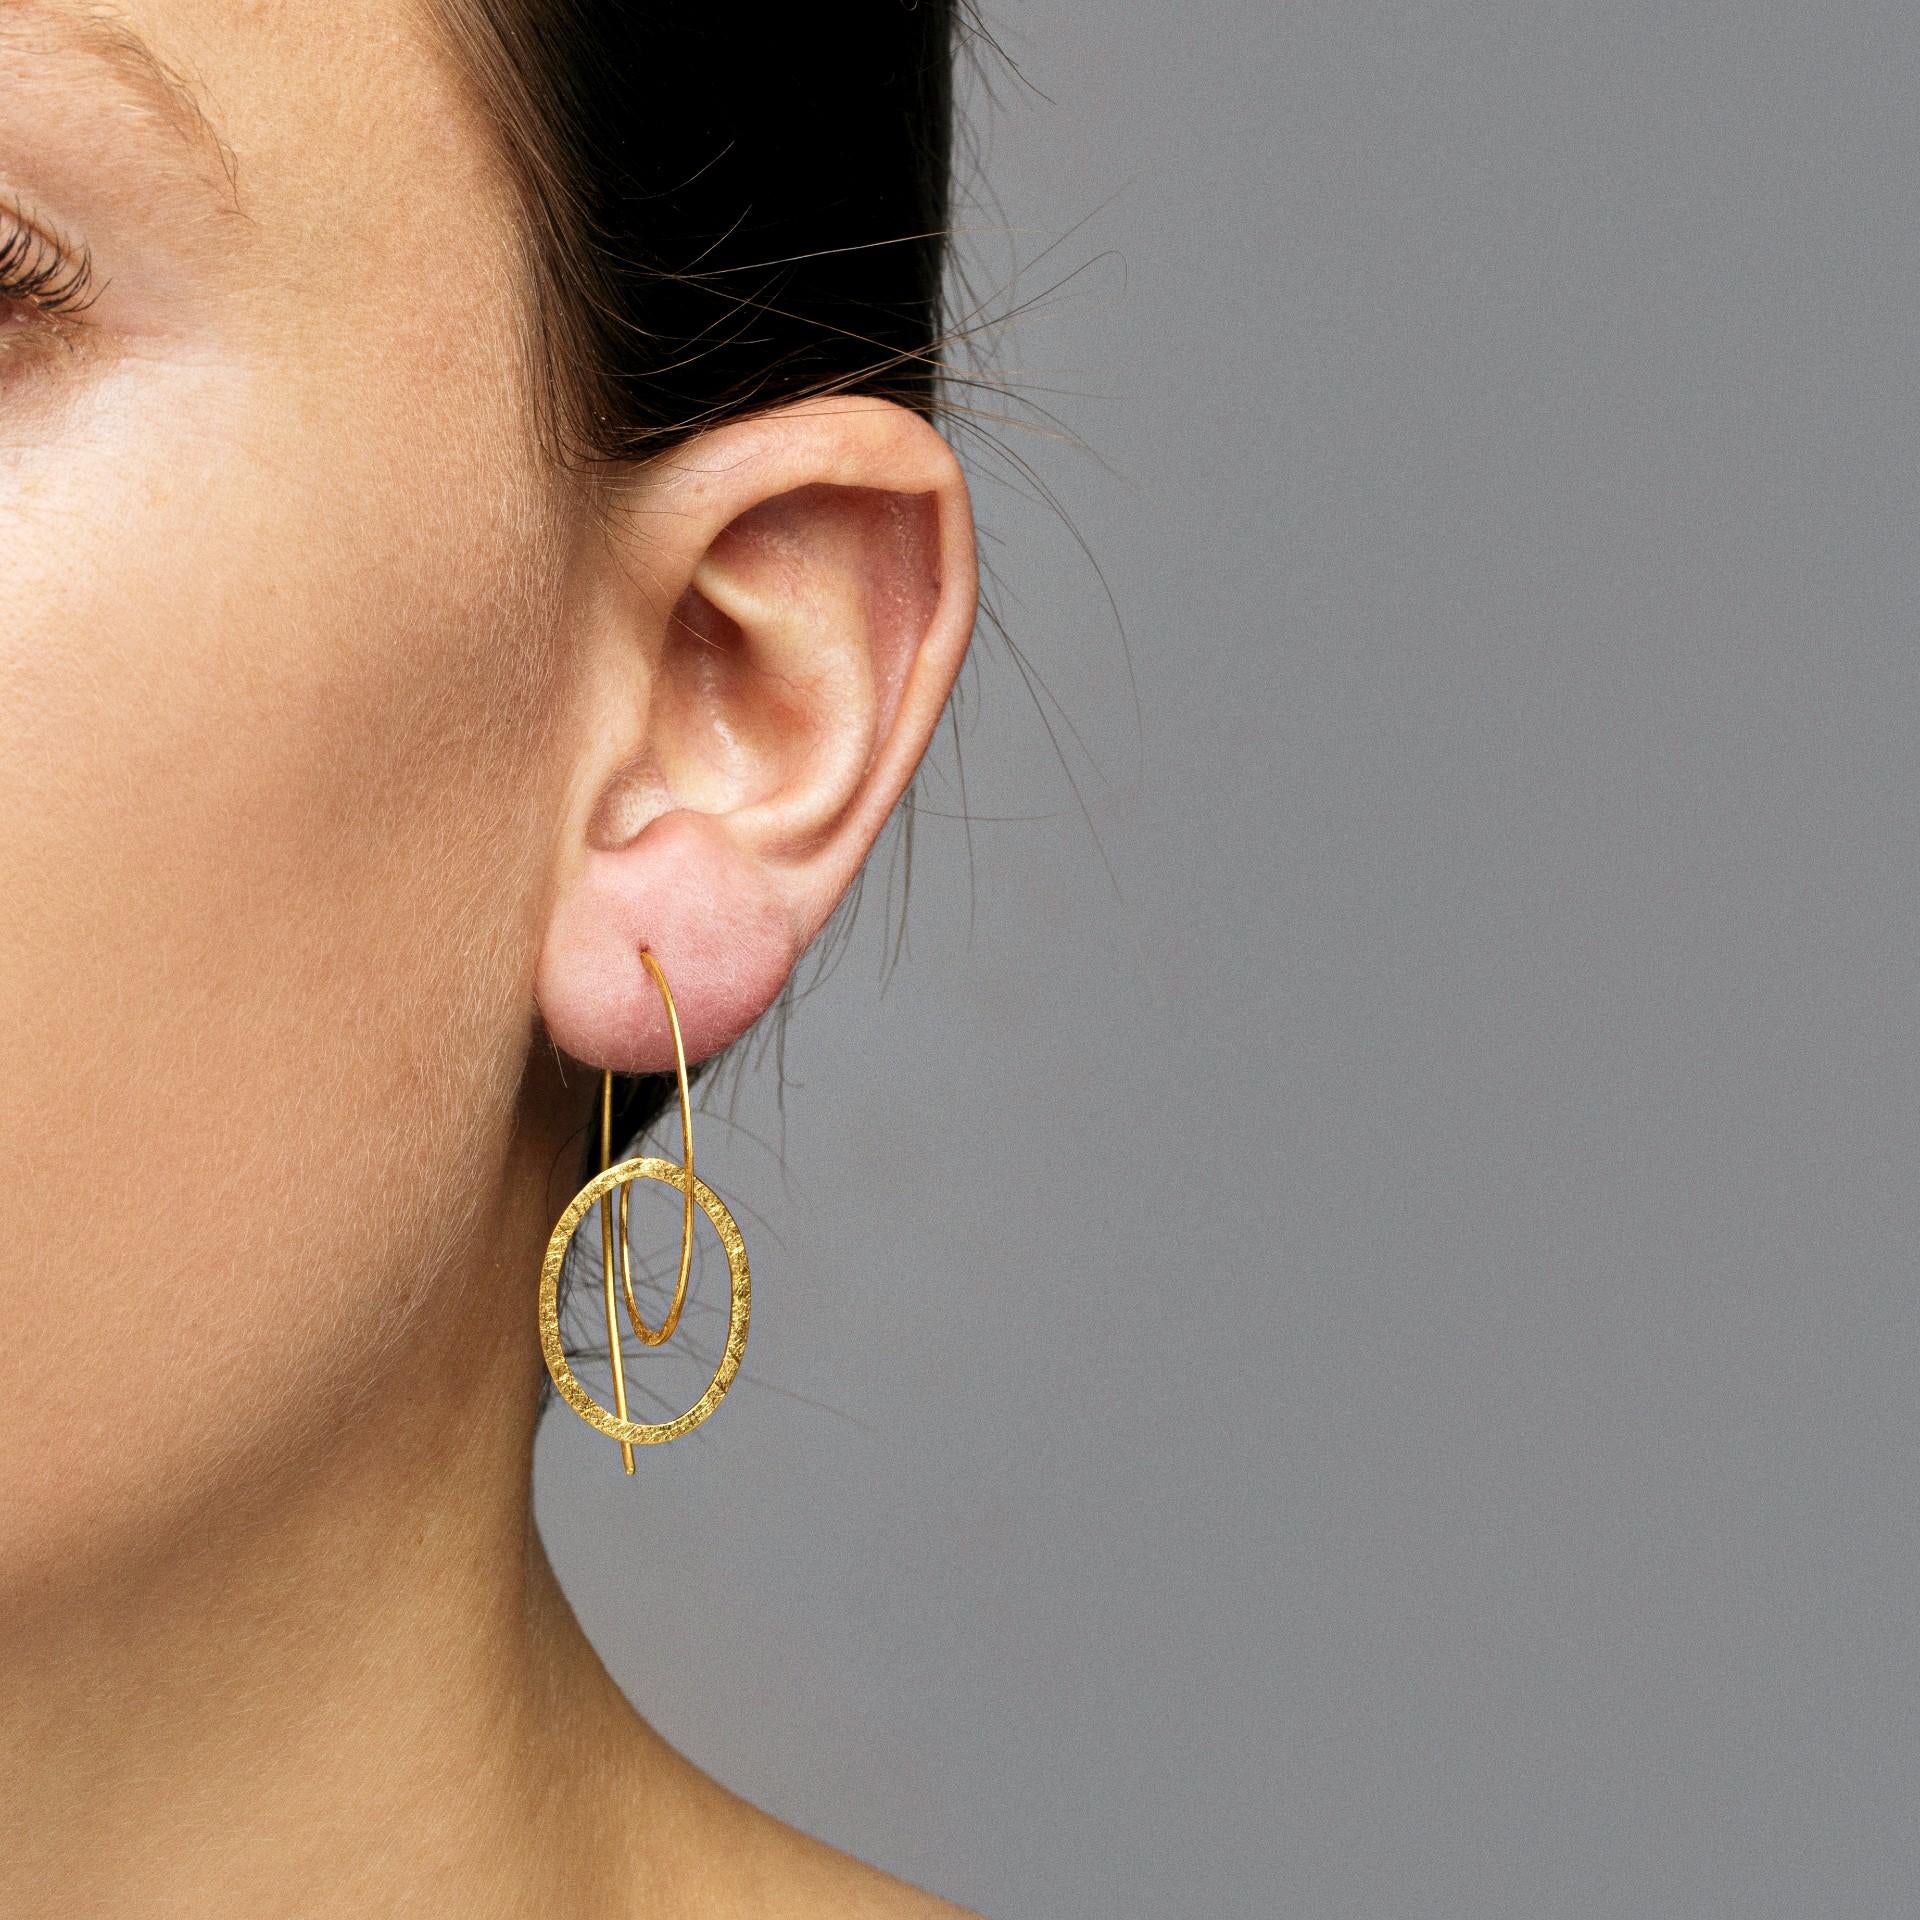 Alex Jona design collection, hand crafted in Italy, 18 karat rough frosted yellow gold circle pendant earrings.
Dimensions: H 1.15in/28mm, W 0.6in/15mm, D 1in/26mm.

Alex Jona jewels stand out, not only for their special design and for the excellent